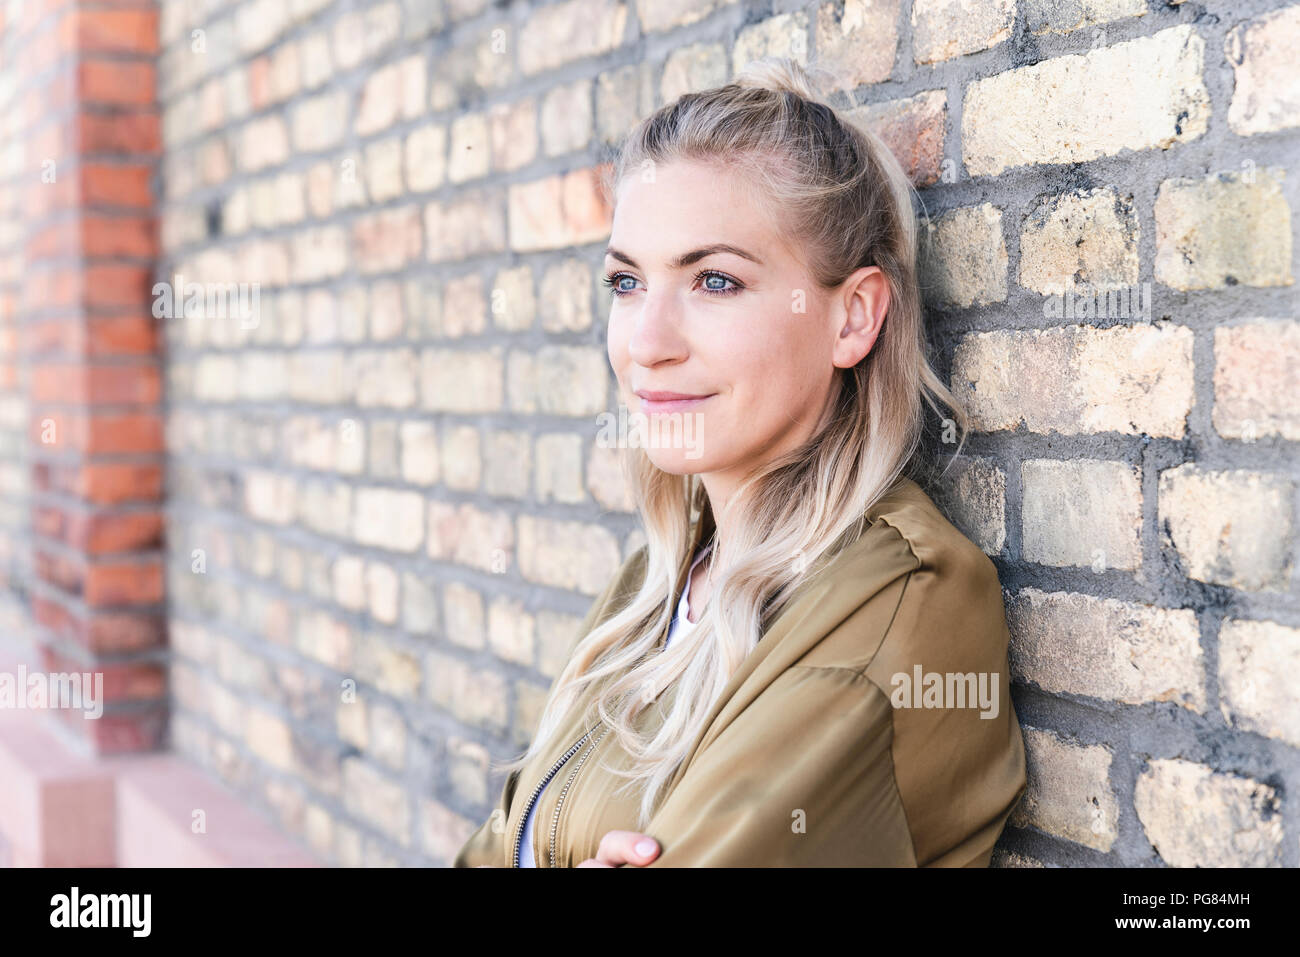 Portrait of a beautiful young woman in front of brickwall Stock Photo